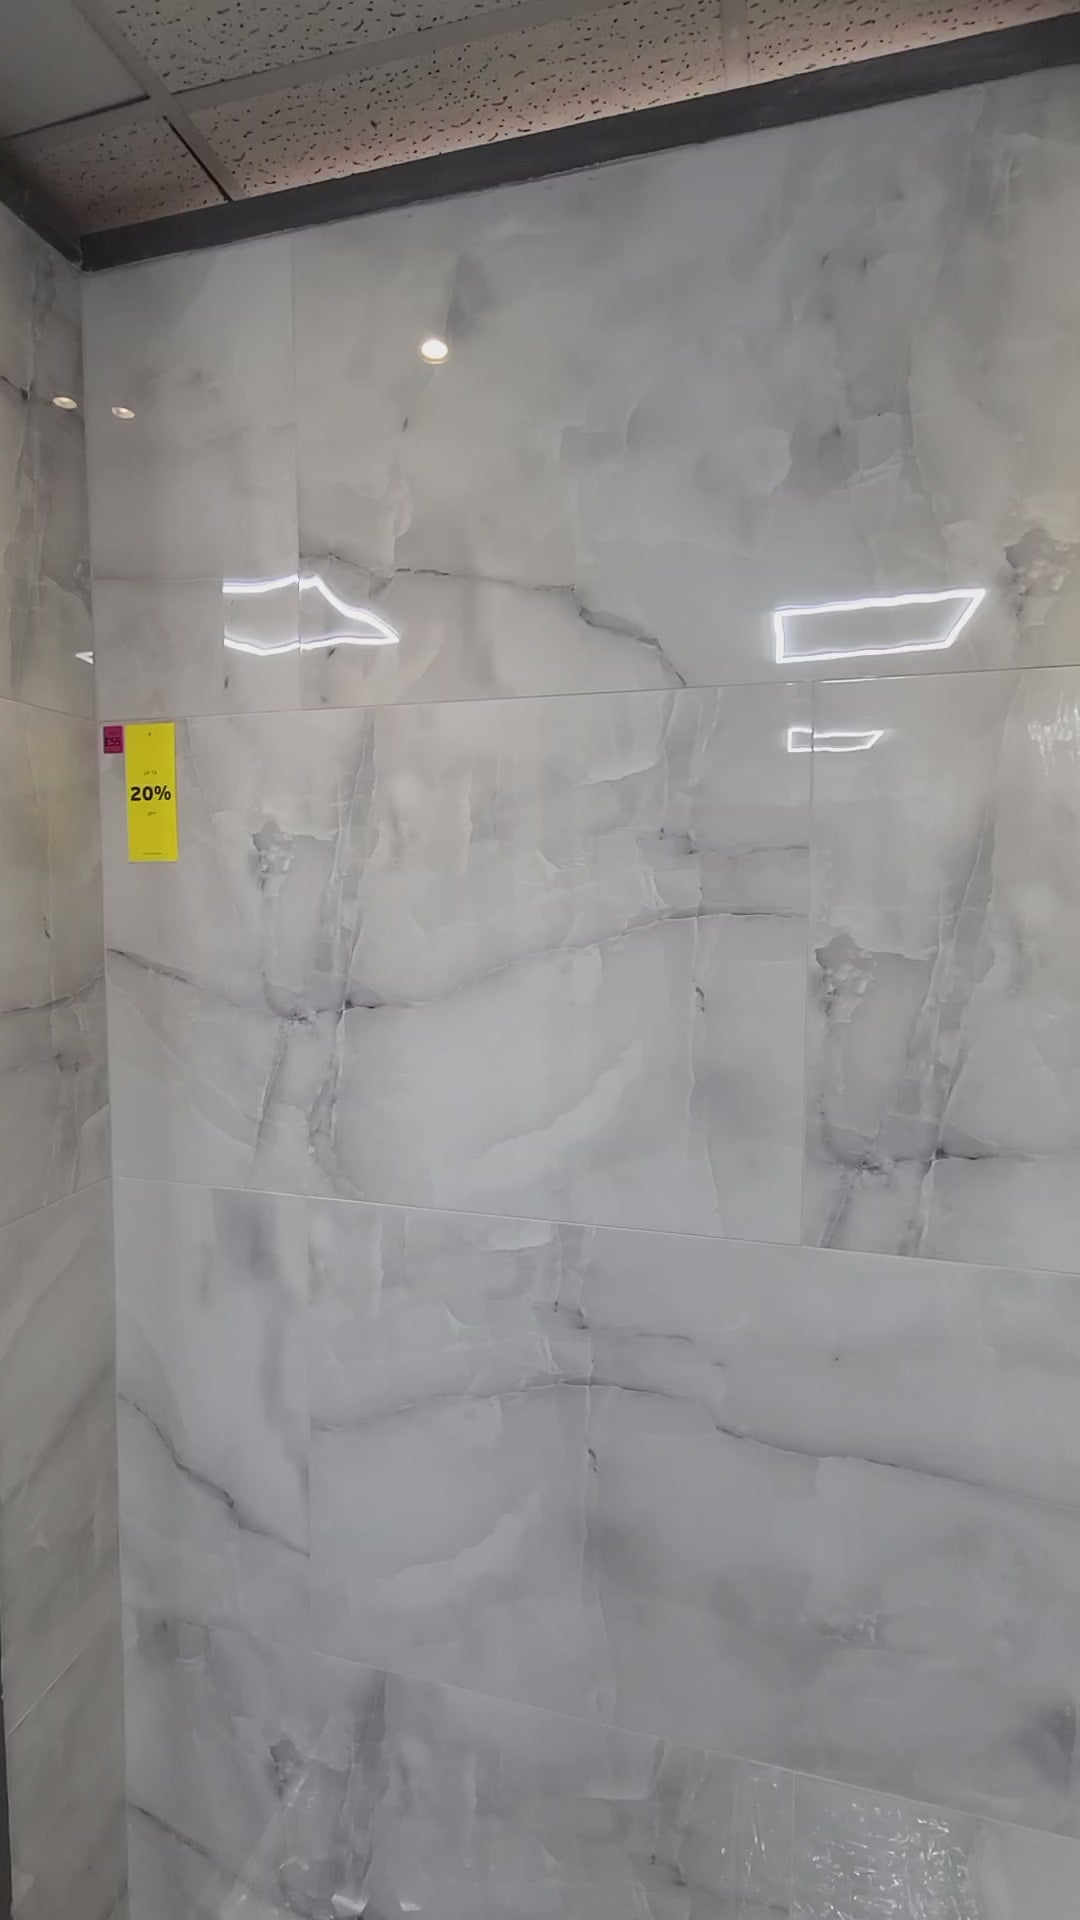 60x120cm largfe format polished high gloss tiles in onyx effect.